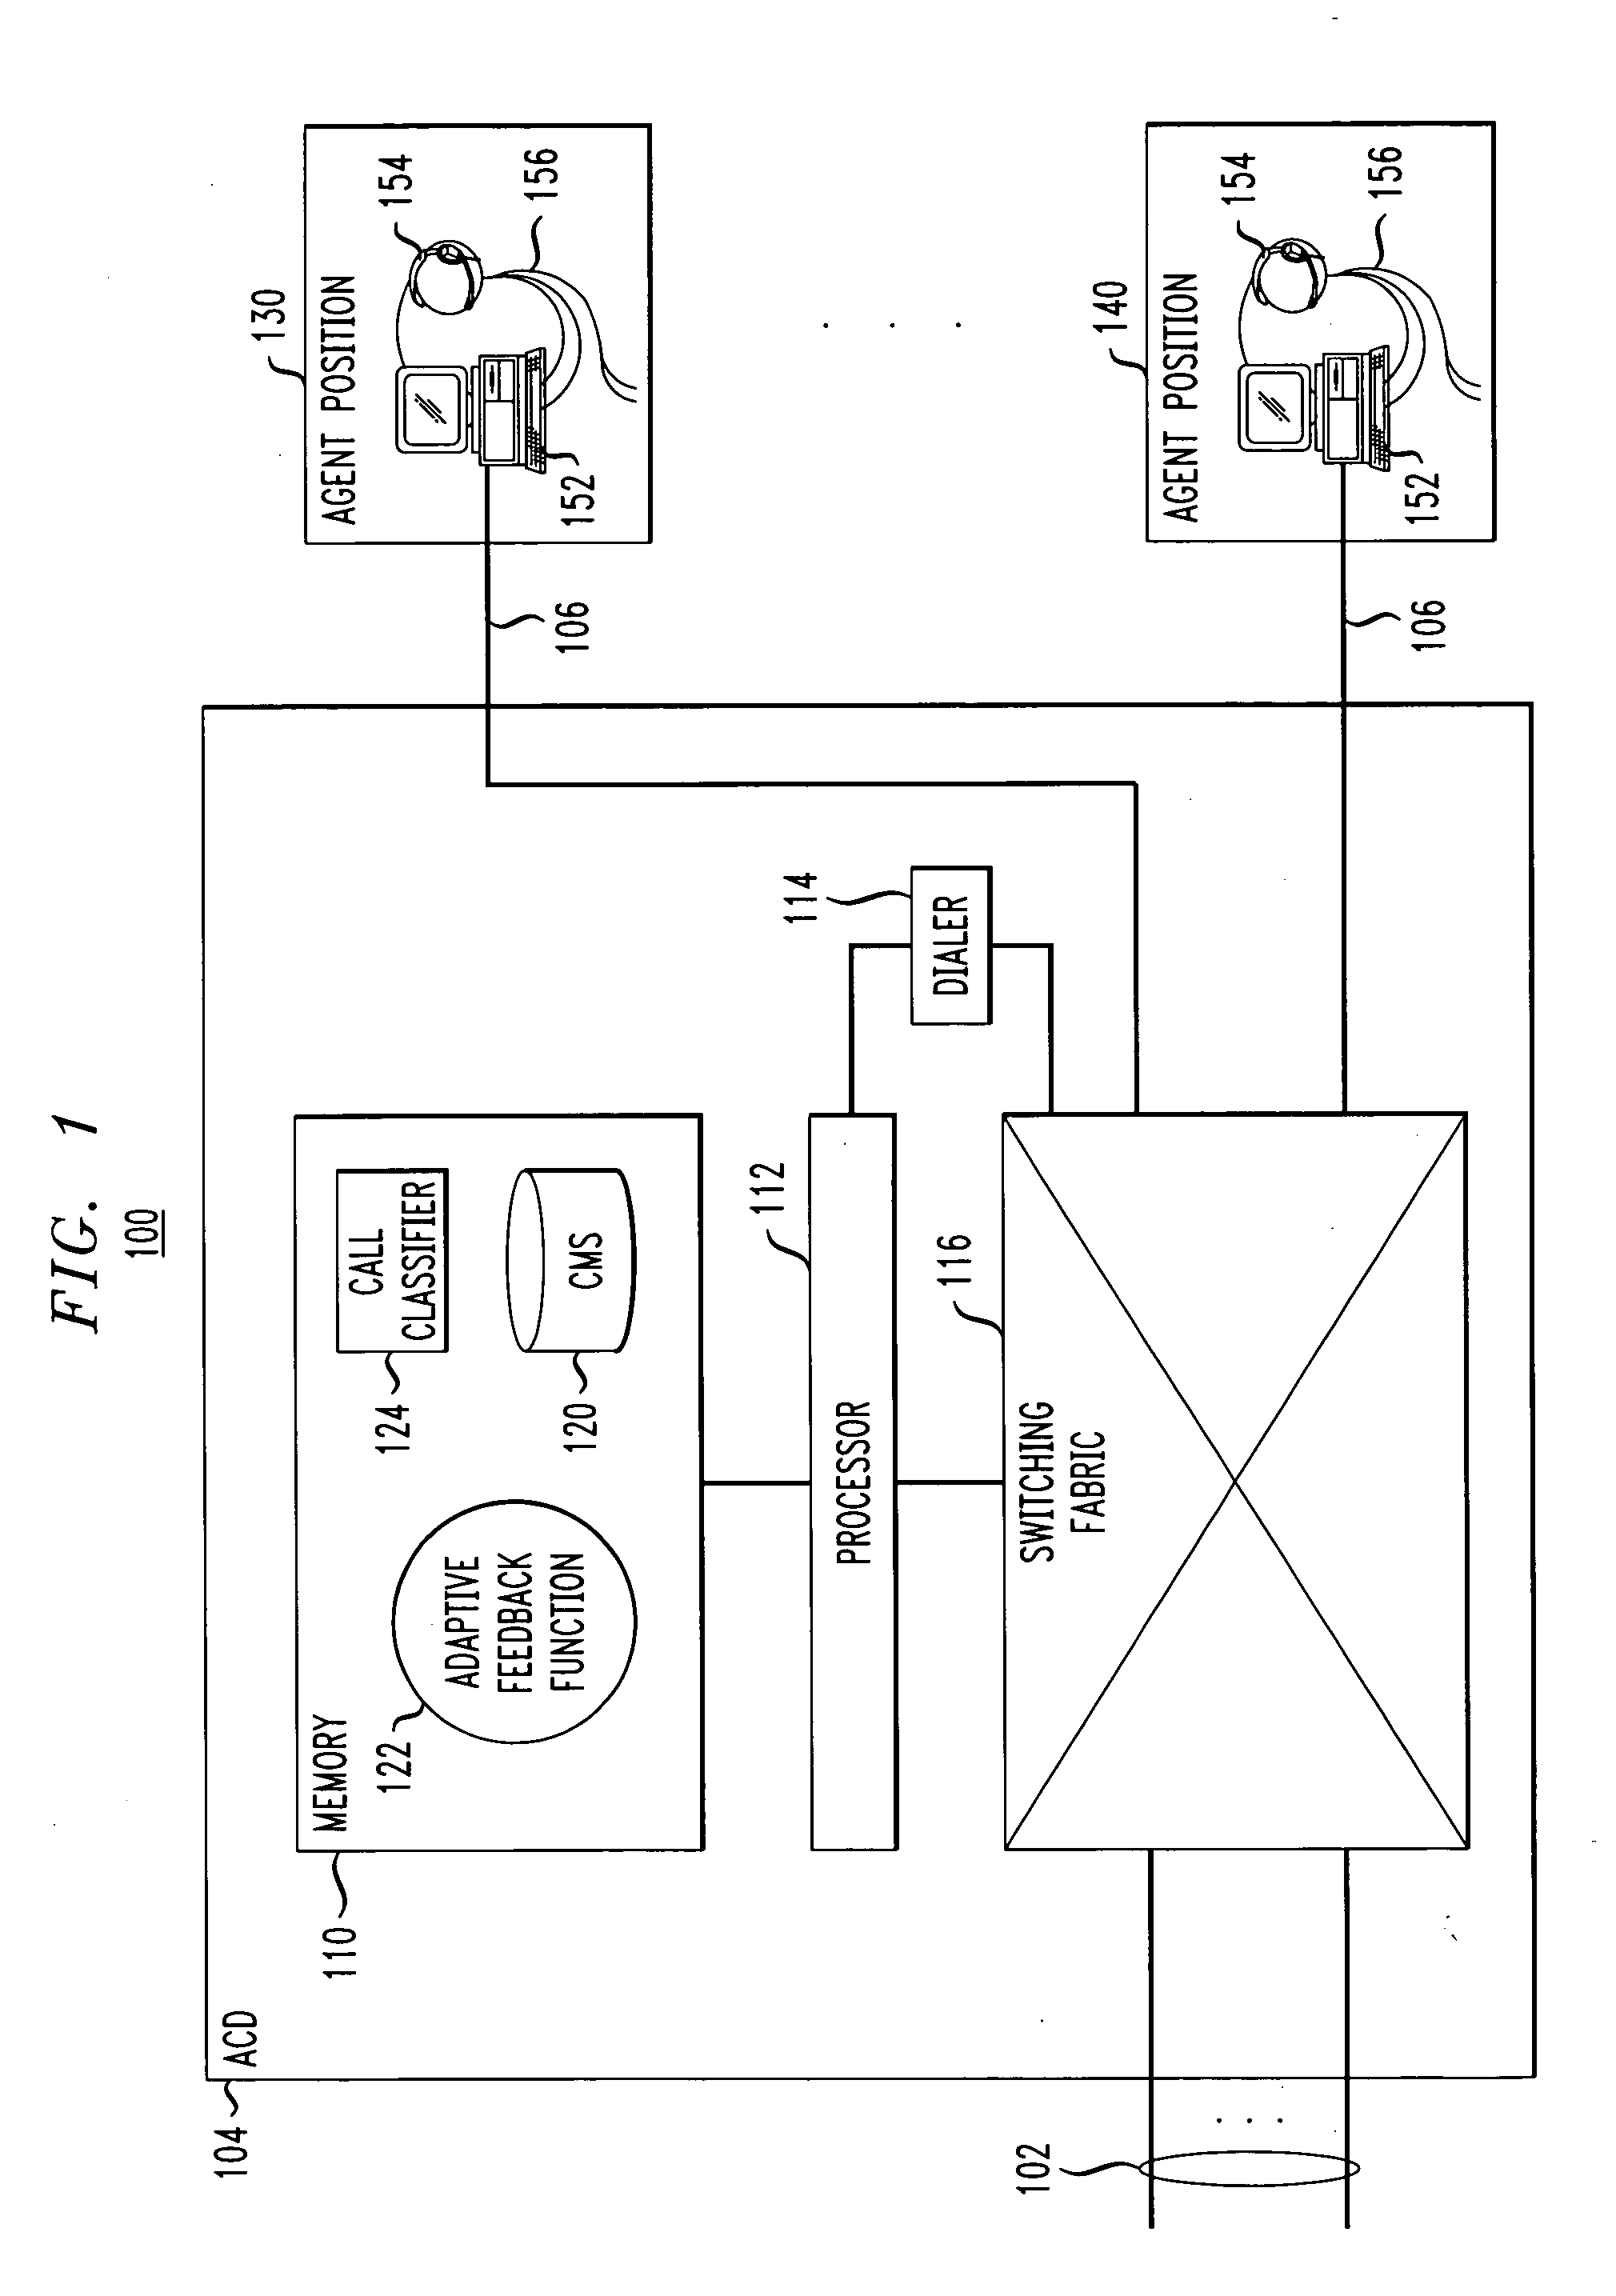 Adaptive feedback arrangment for controlling agent availability service level in a predictive dialer